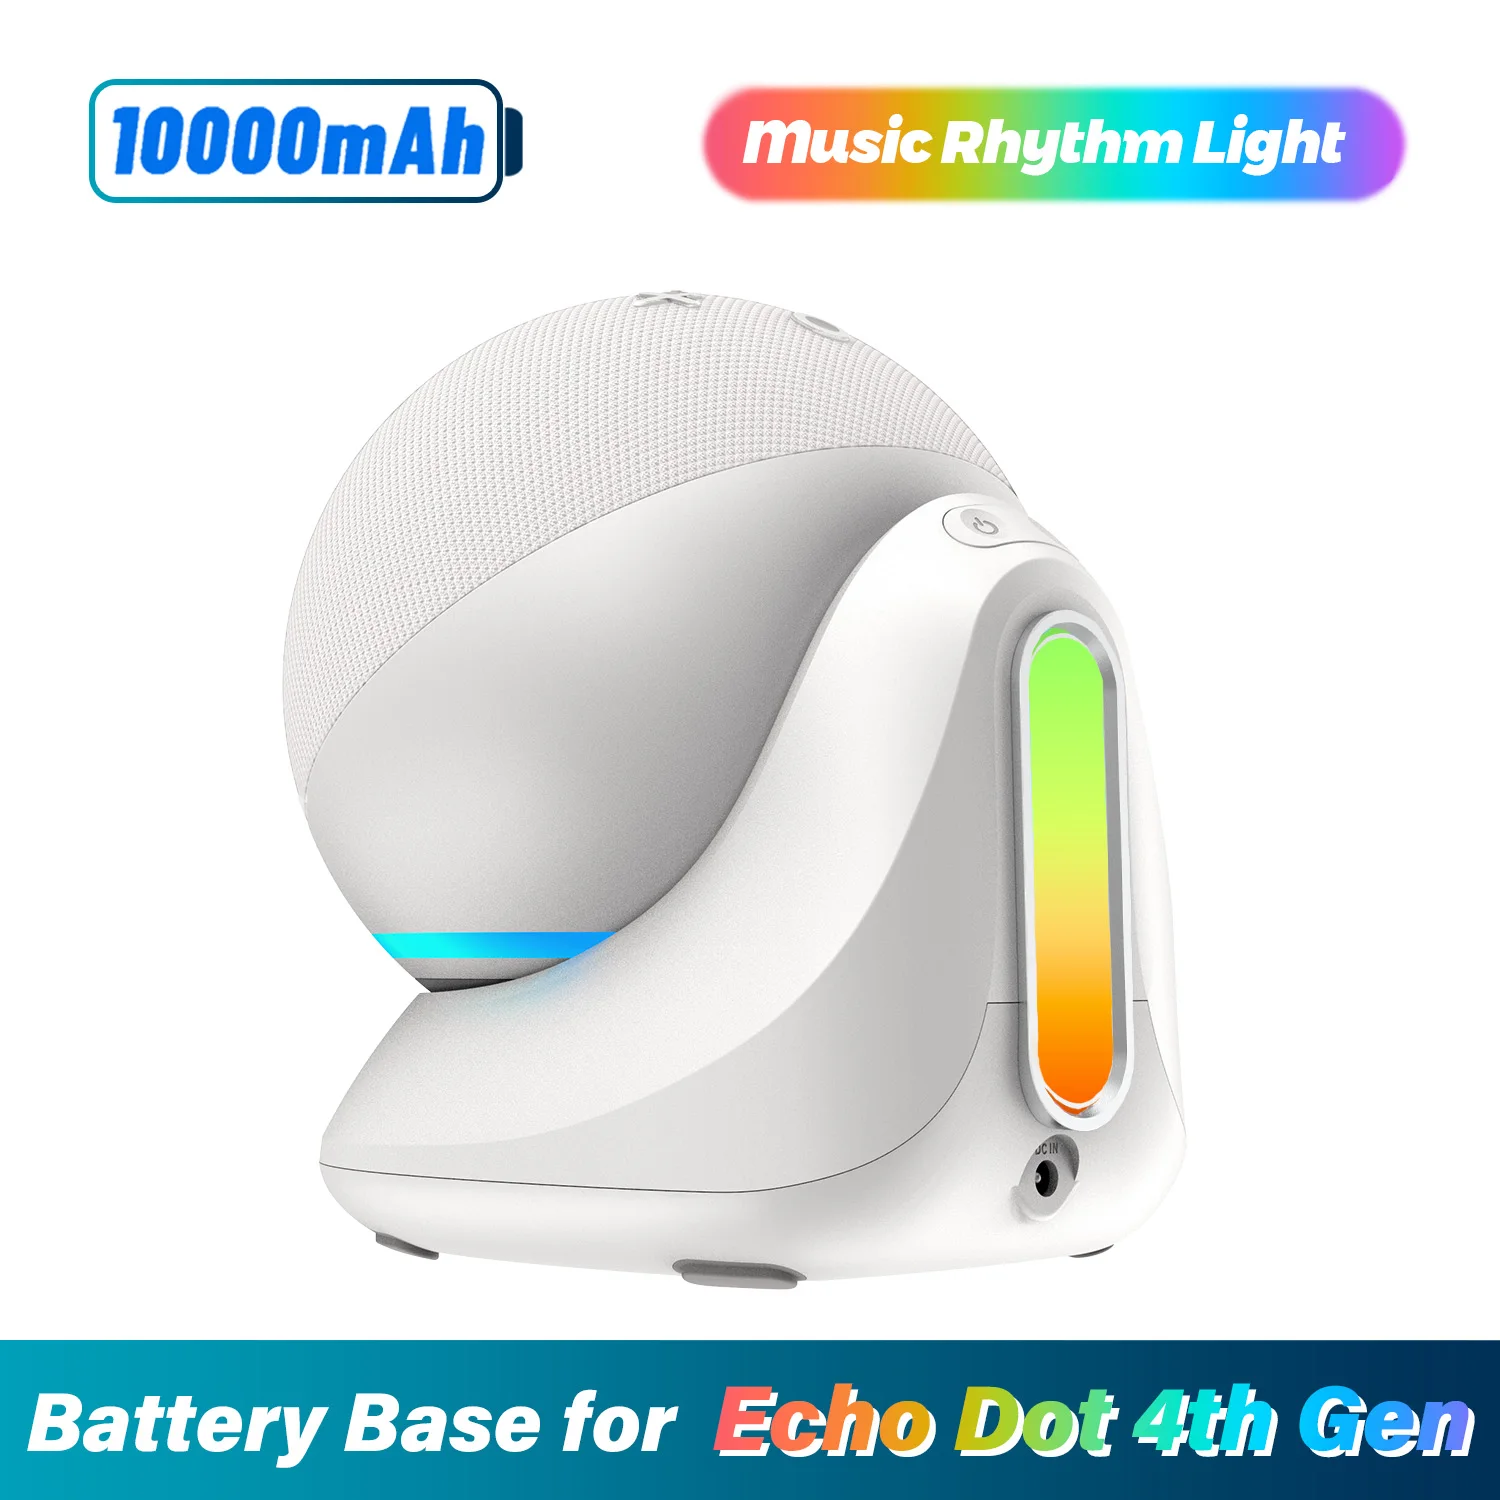 

Music Rhythm Lights Battery Base For Echo Dot 4th Gen Portable Charger Power Bank For Alexa Speaker Docking Station Rechargeable